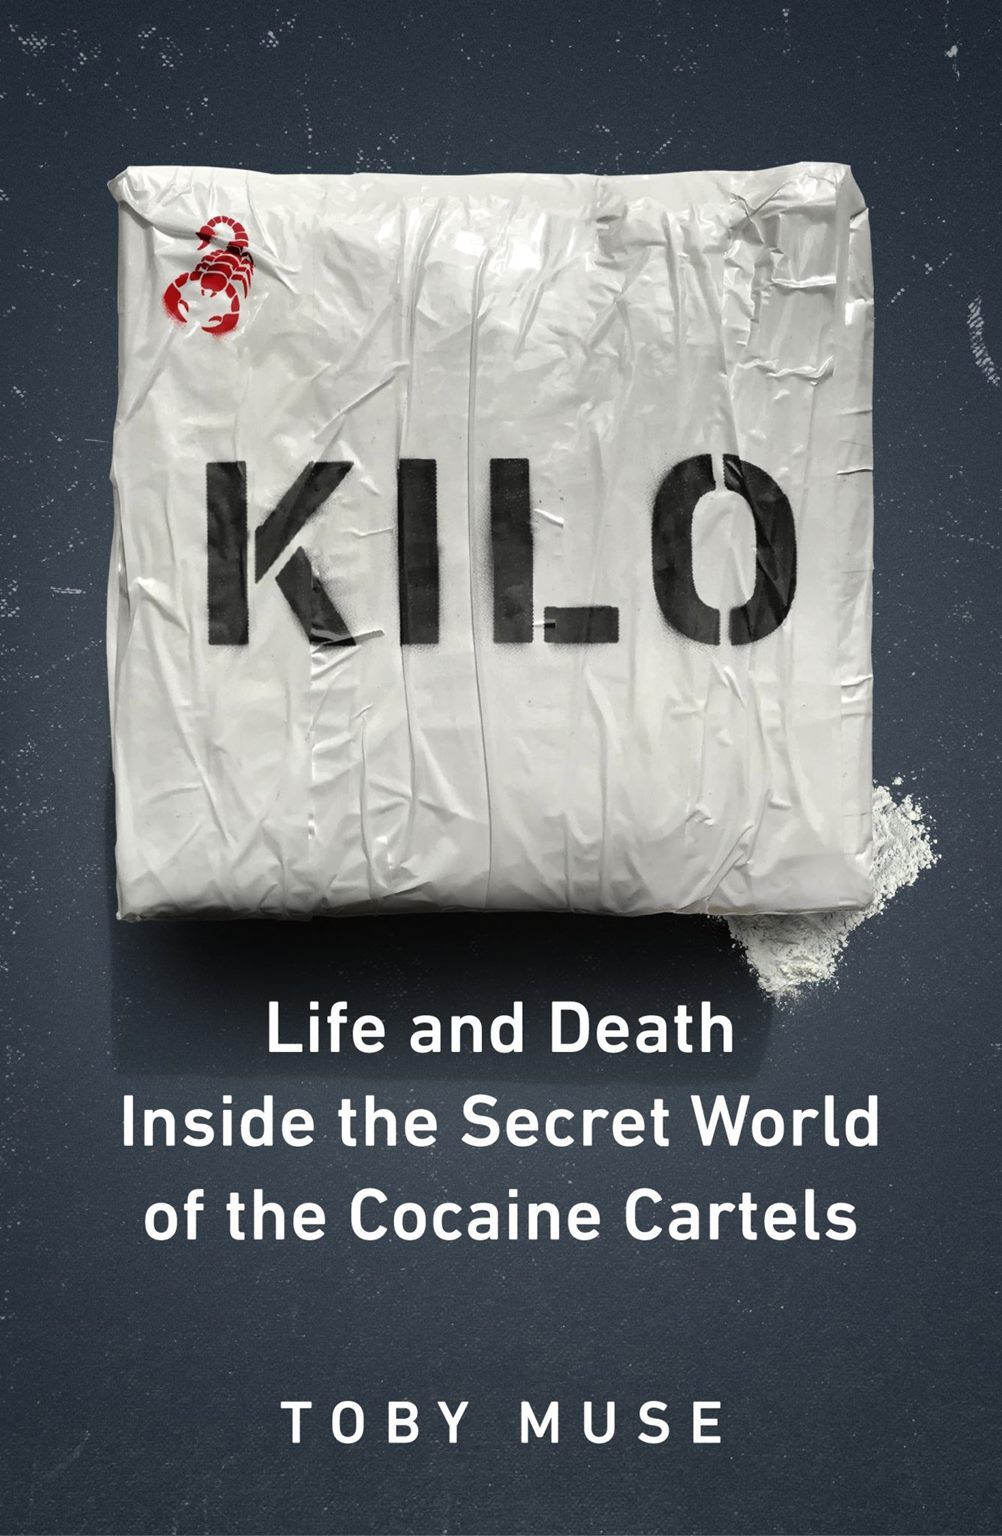 KILO: Life and Death Inside the Secret World of the Cocaine Cartels